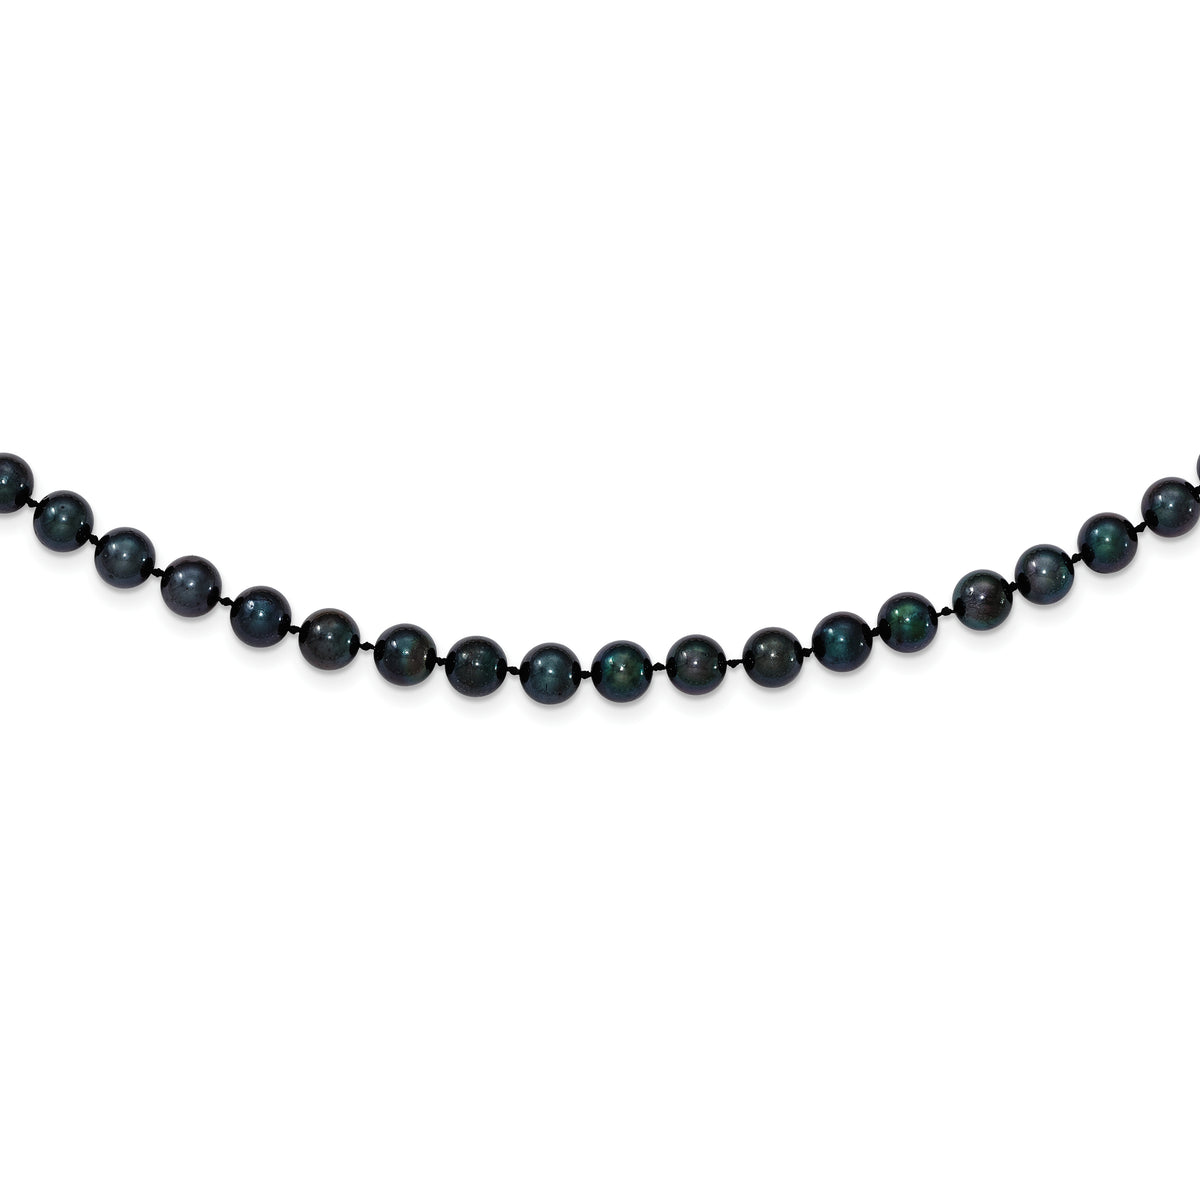 14k White Gold 6-7mm Round Black Saltwater Akoya Cultured Pearl Necklace